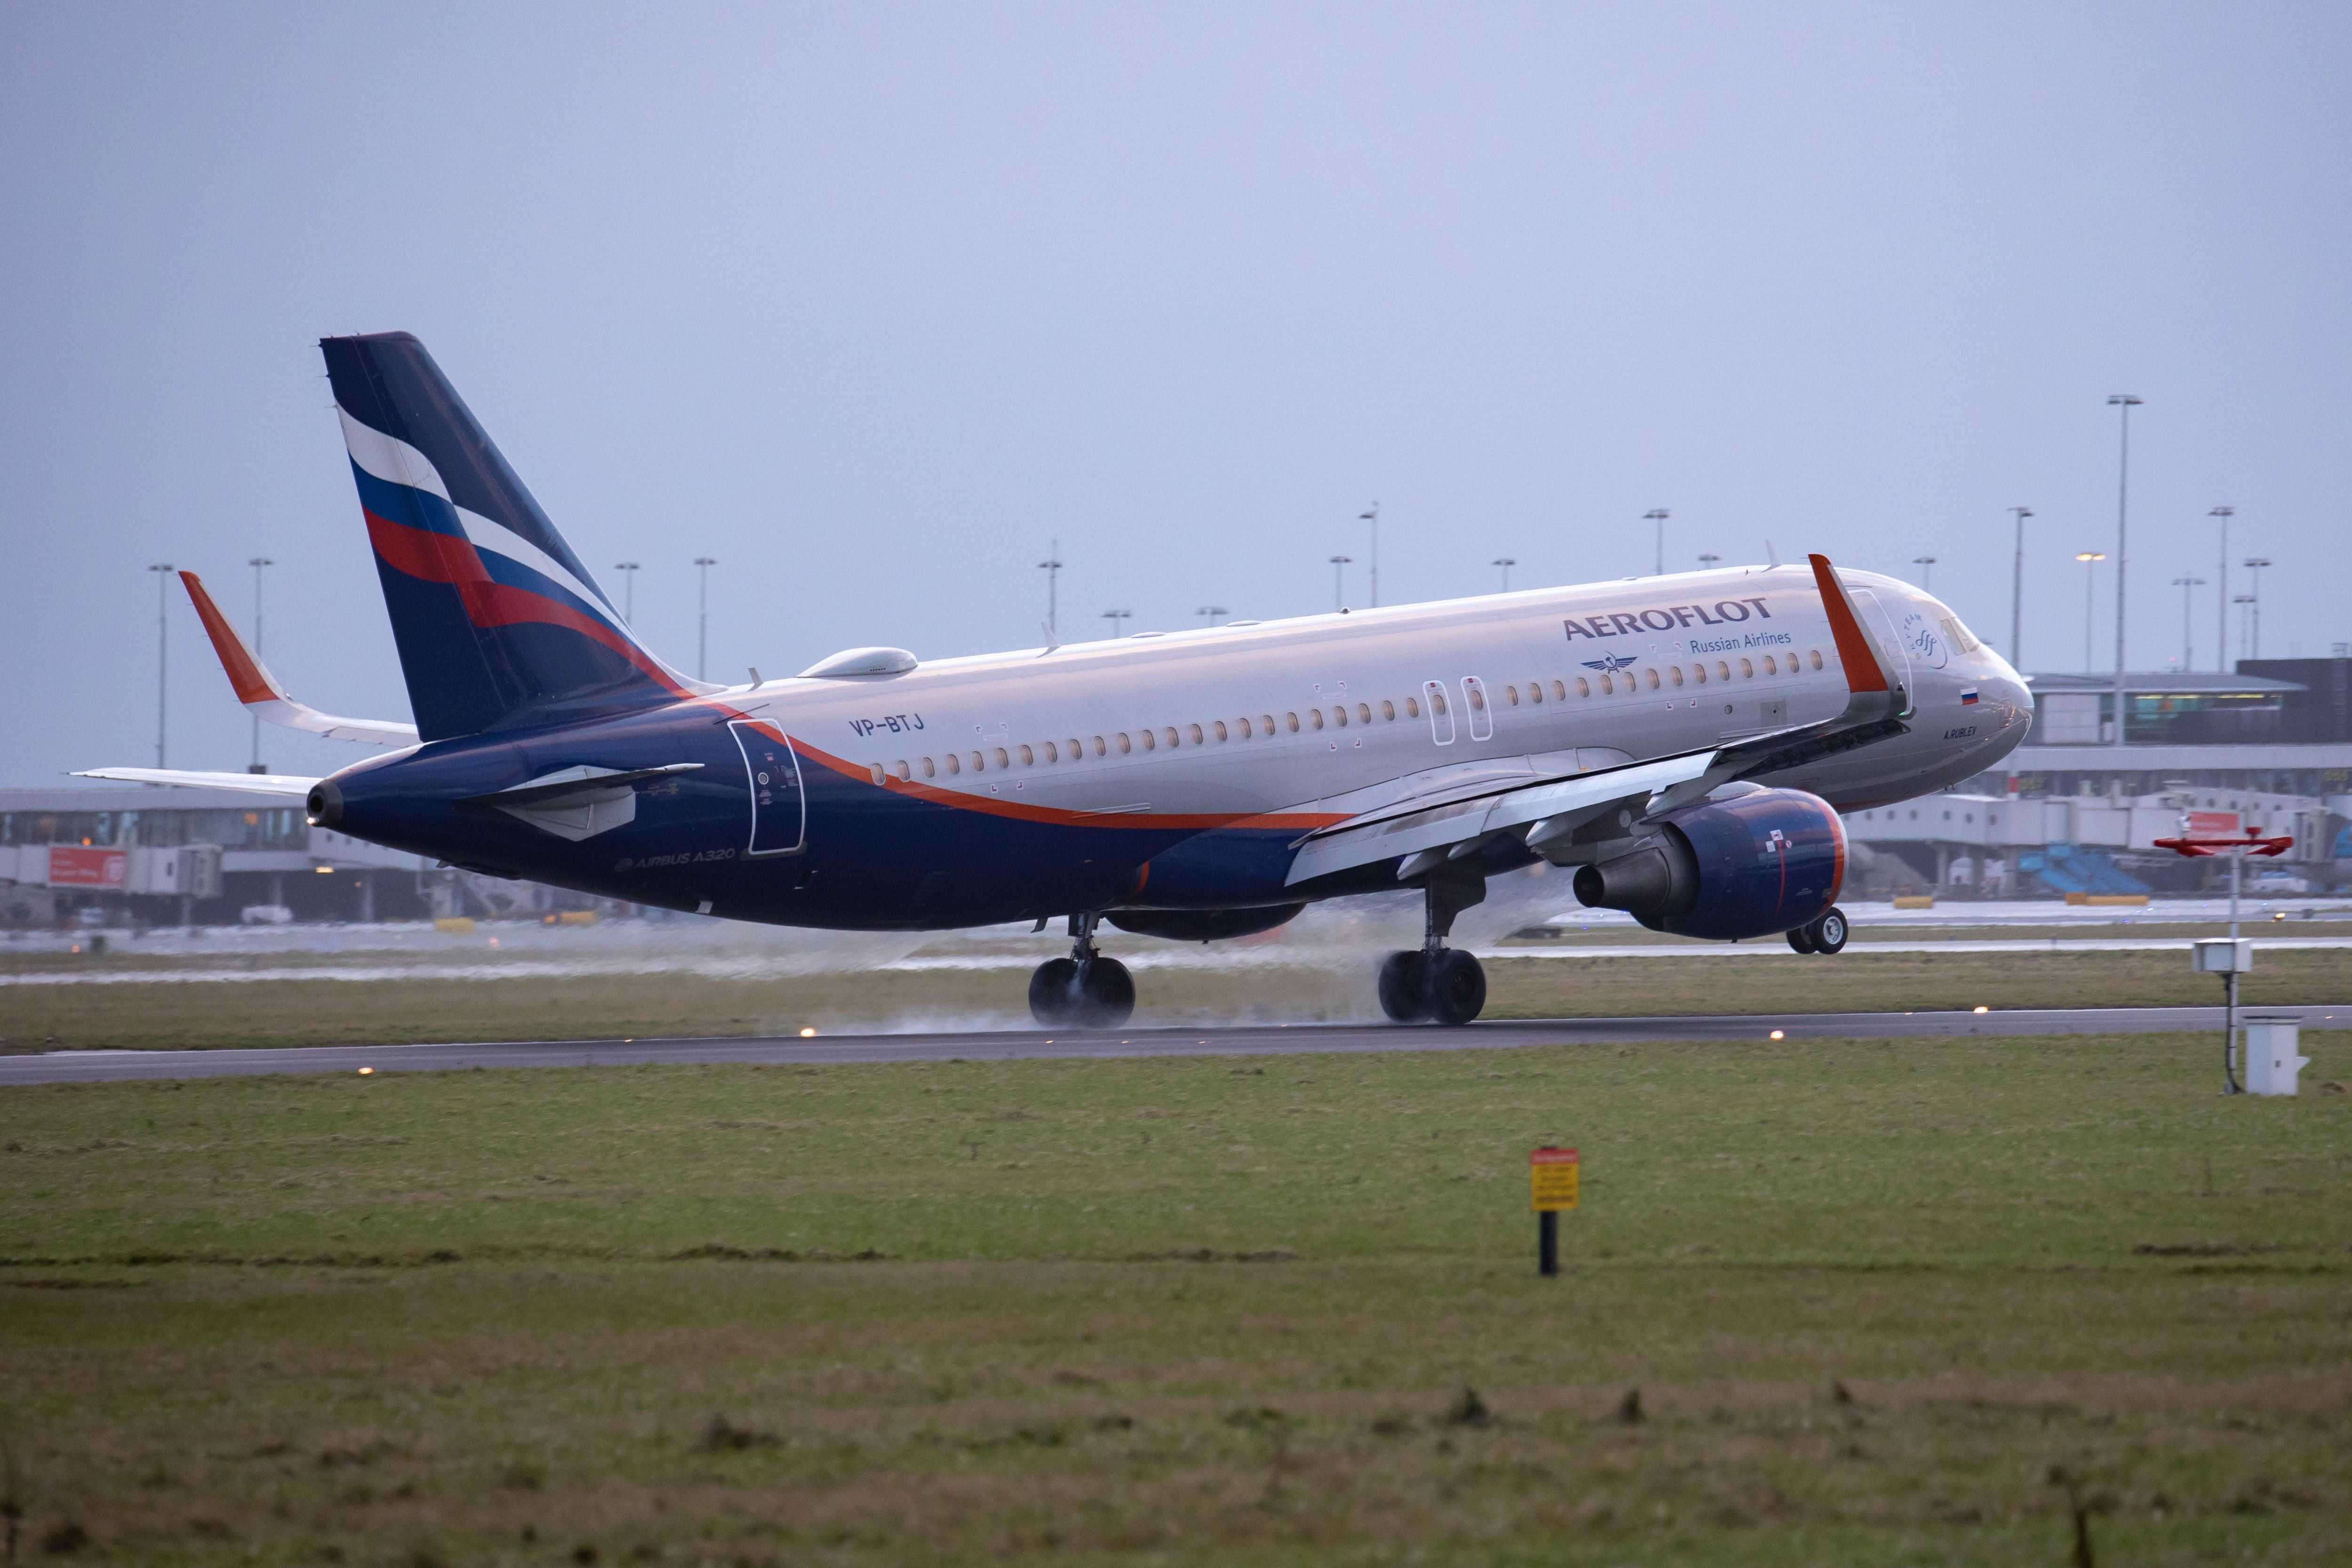 An Aeroflot - Russian Airlines Airbus A320 aircraft as seen on final approach flying and landing on the runway at Amsterdam Schiphol Airport